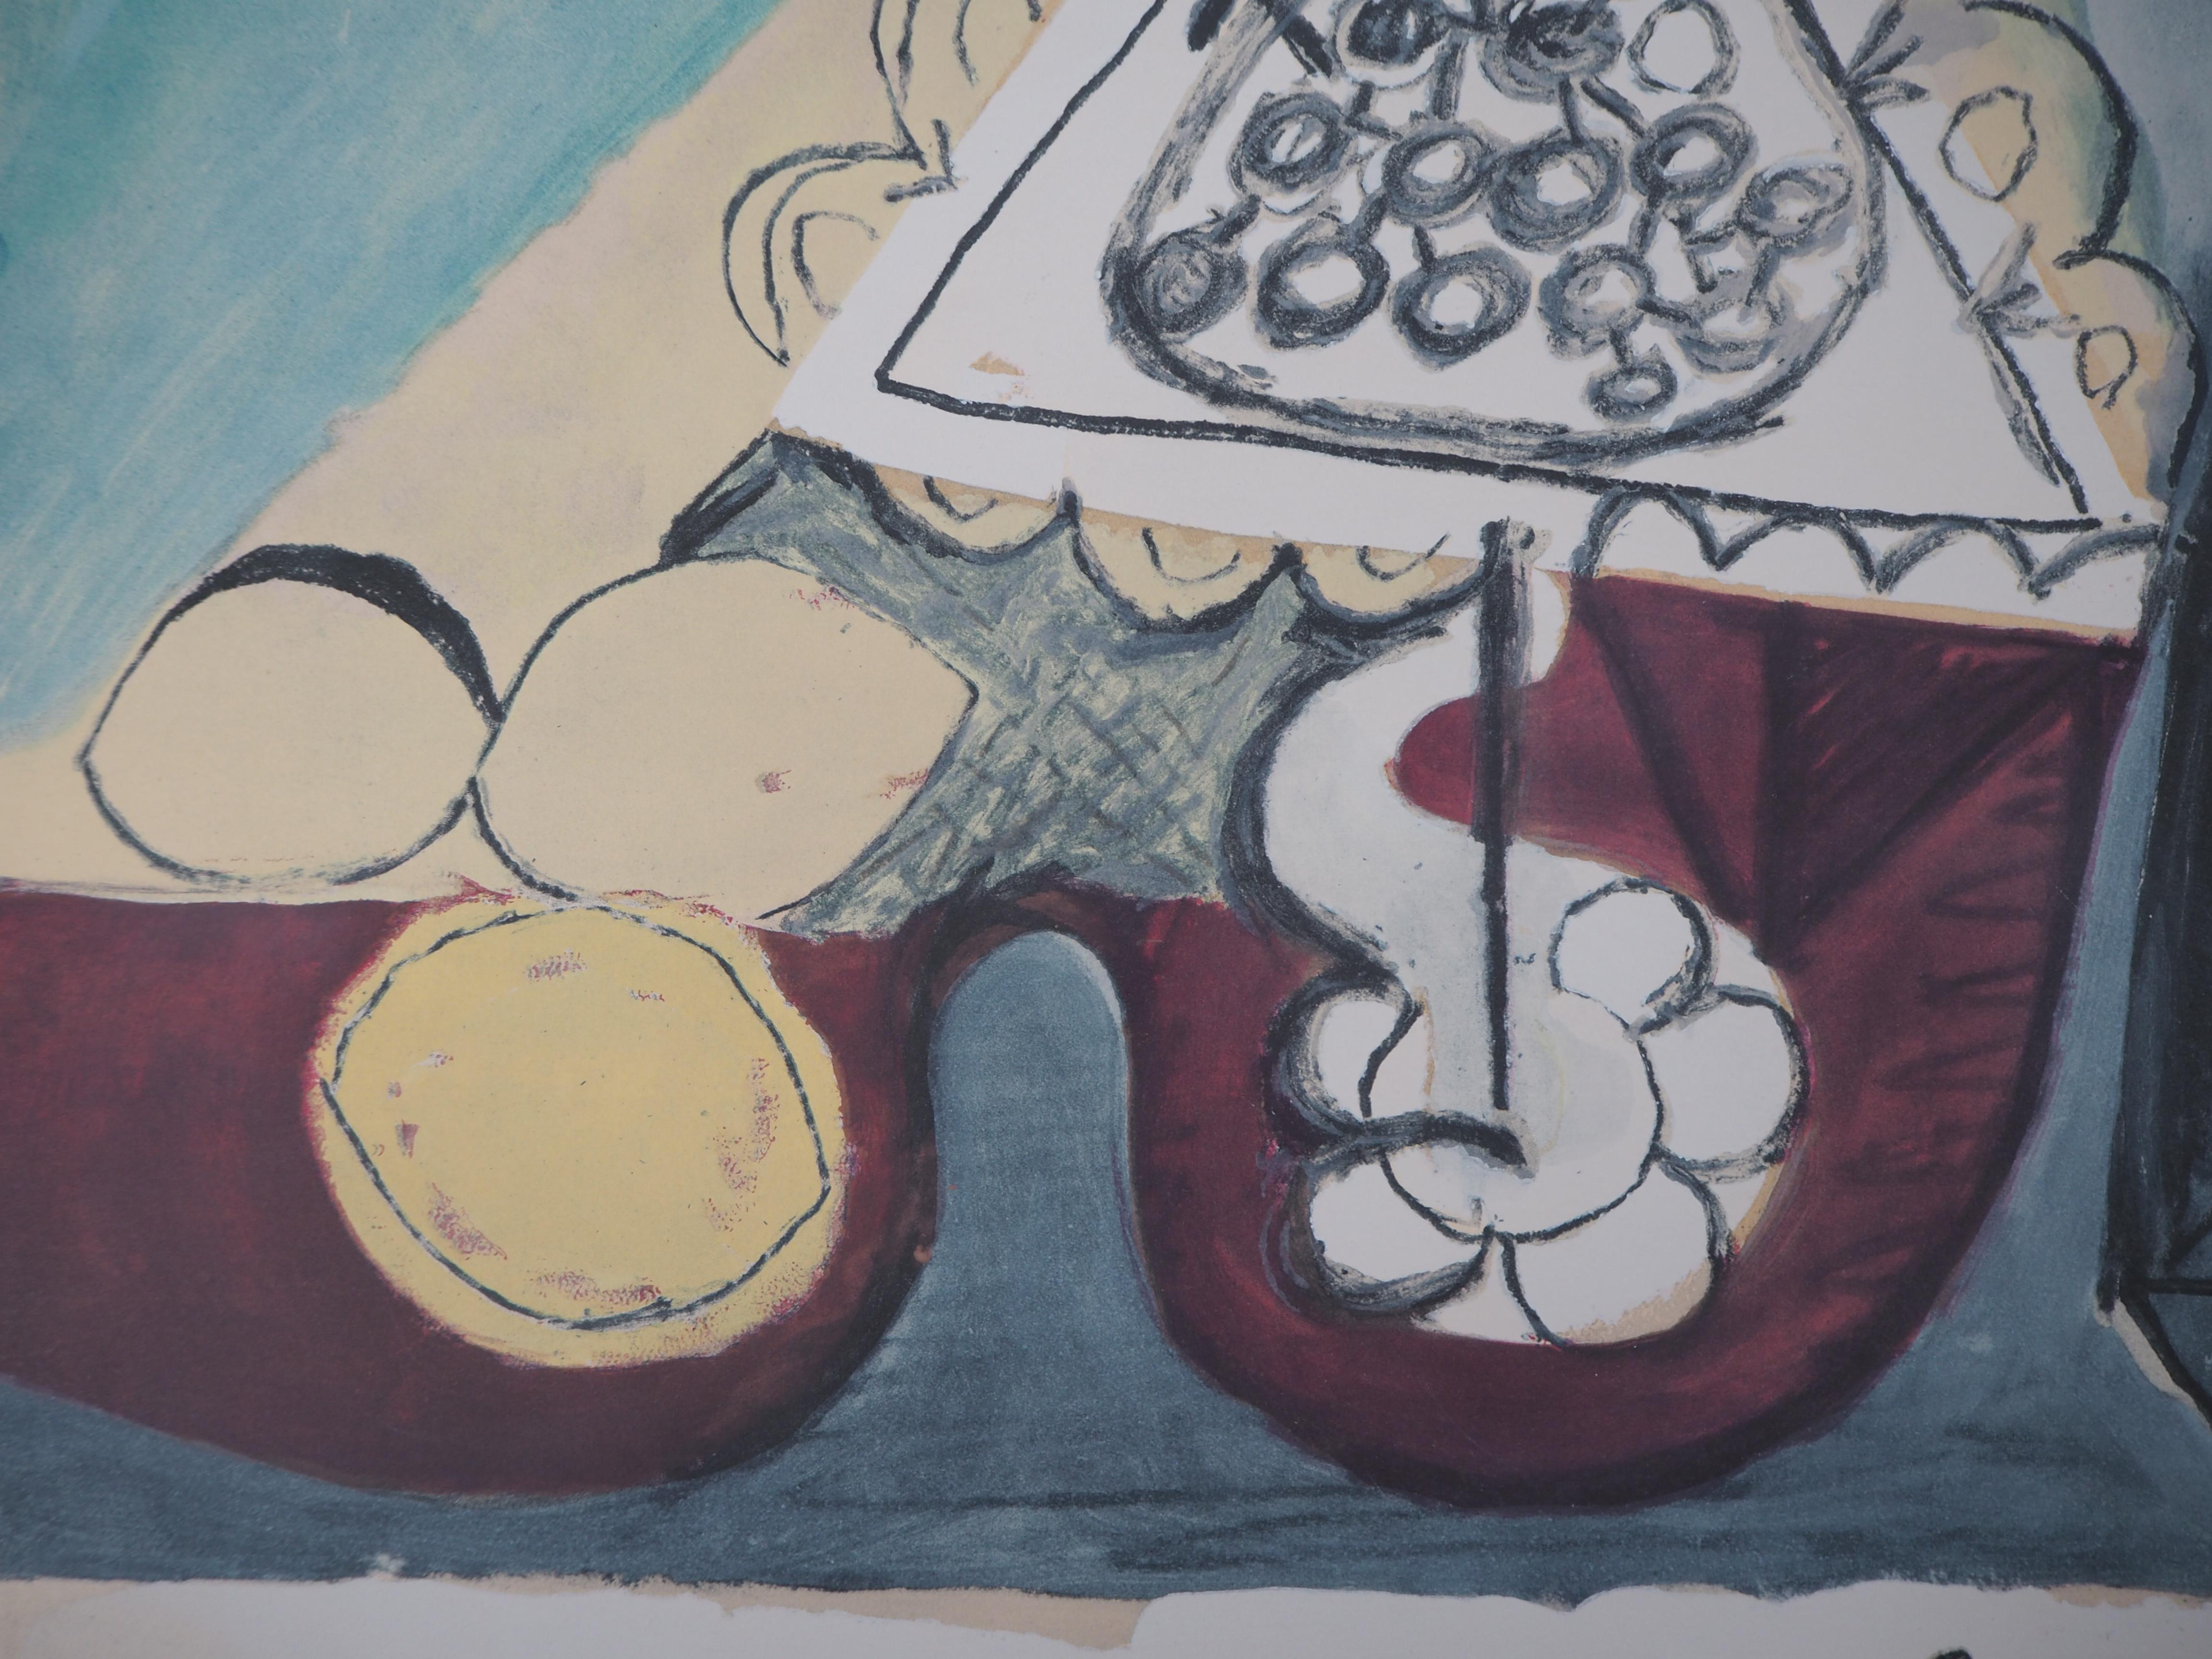 Still Life with Lemons and Bottle - Lithograph (Jacomet 1960) - Cubist Print by (after) Pablo Picasso